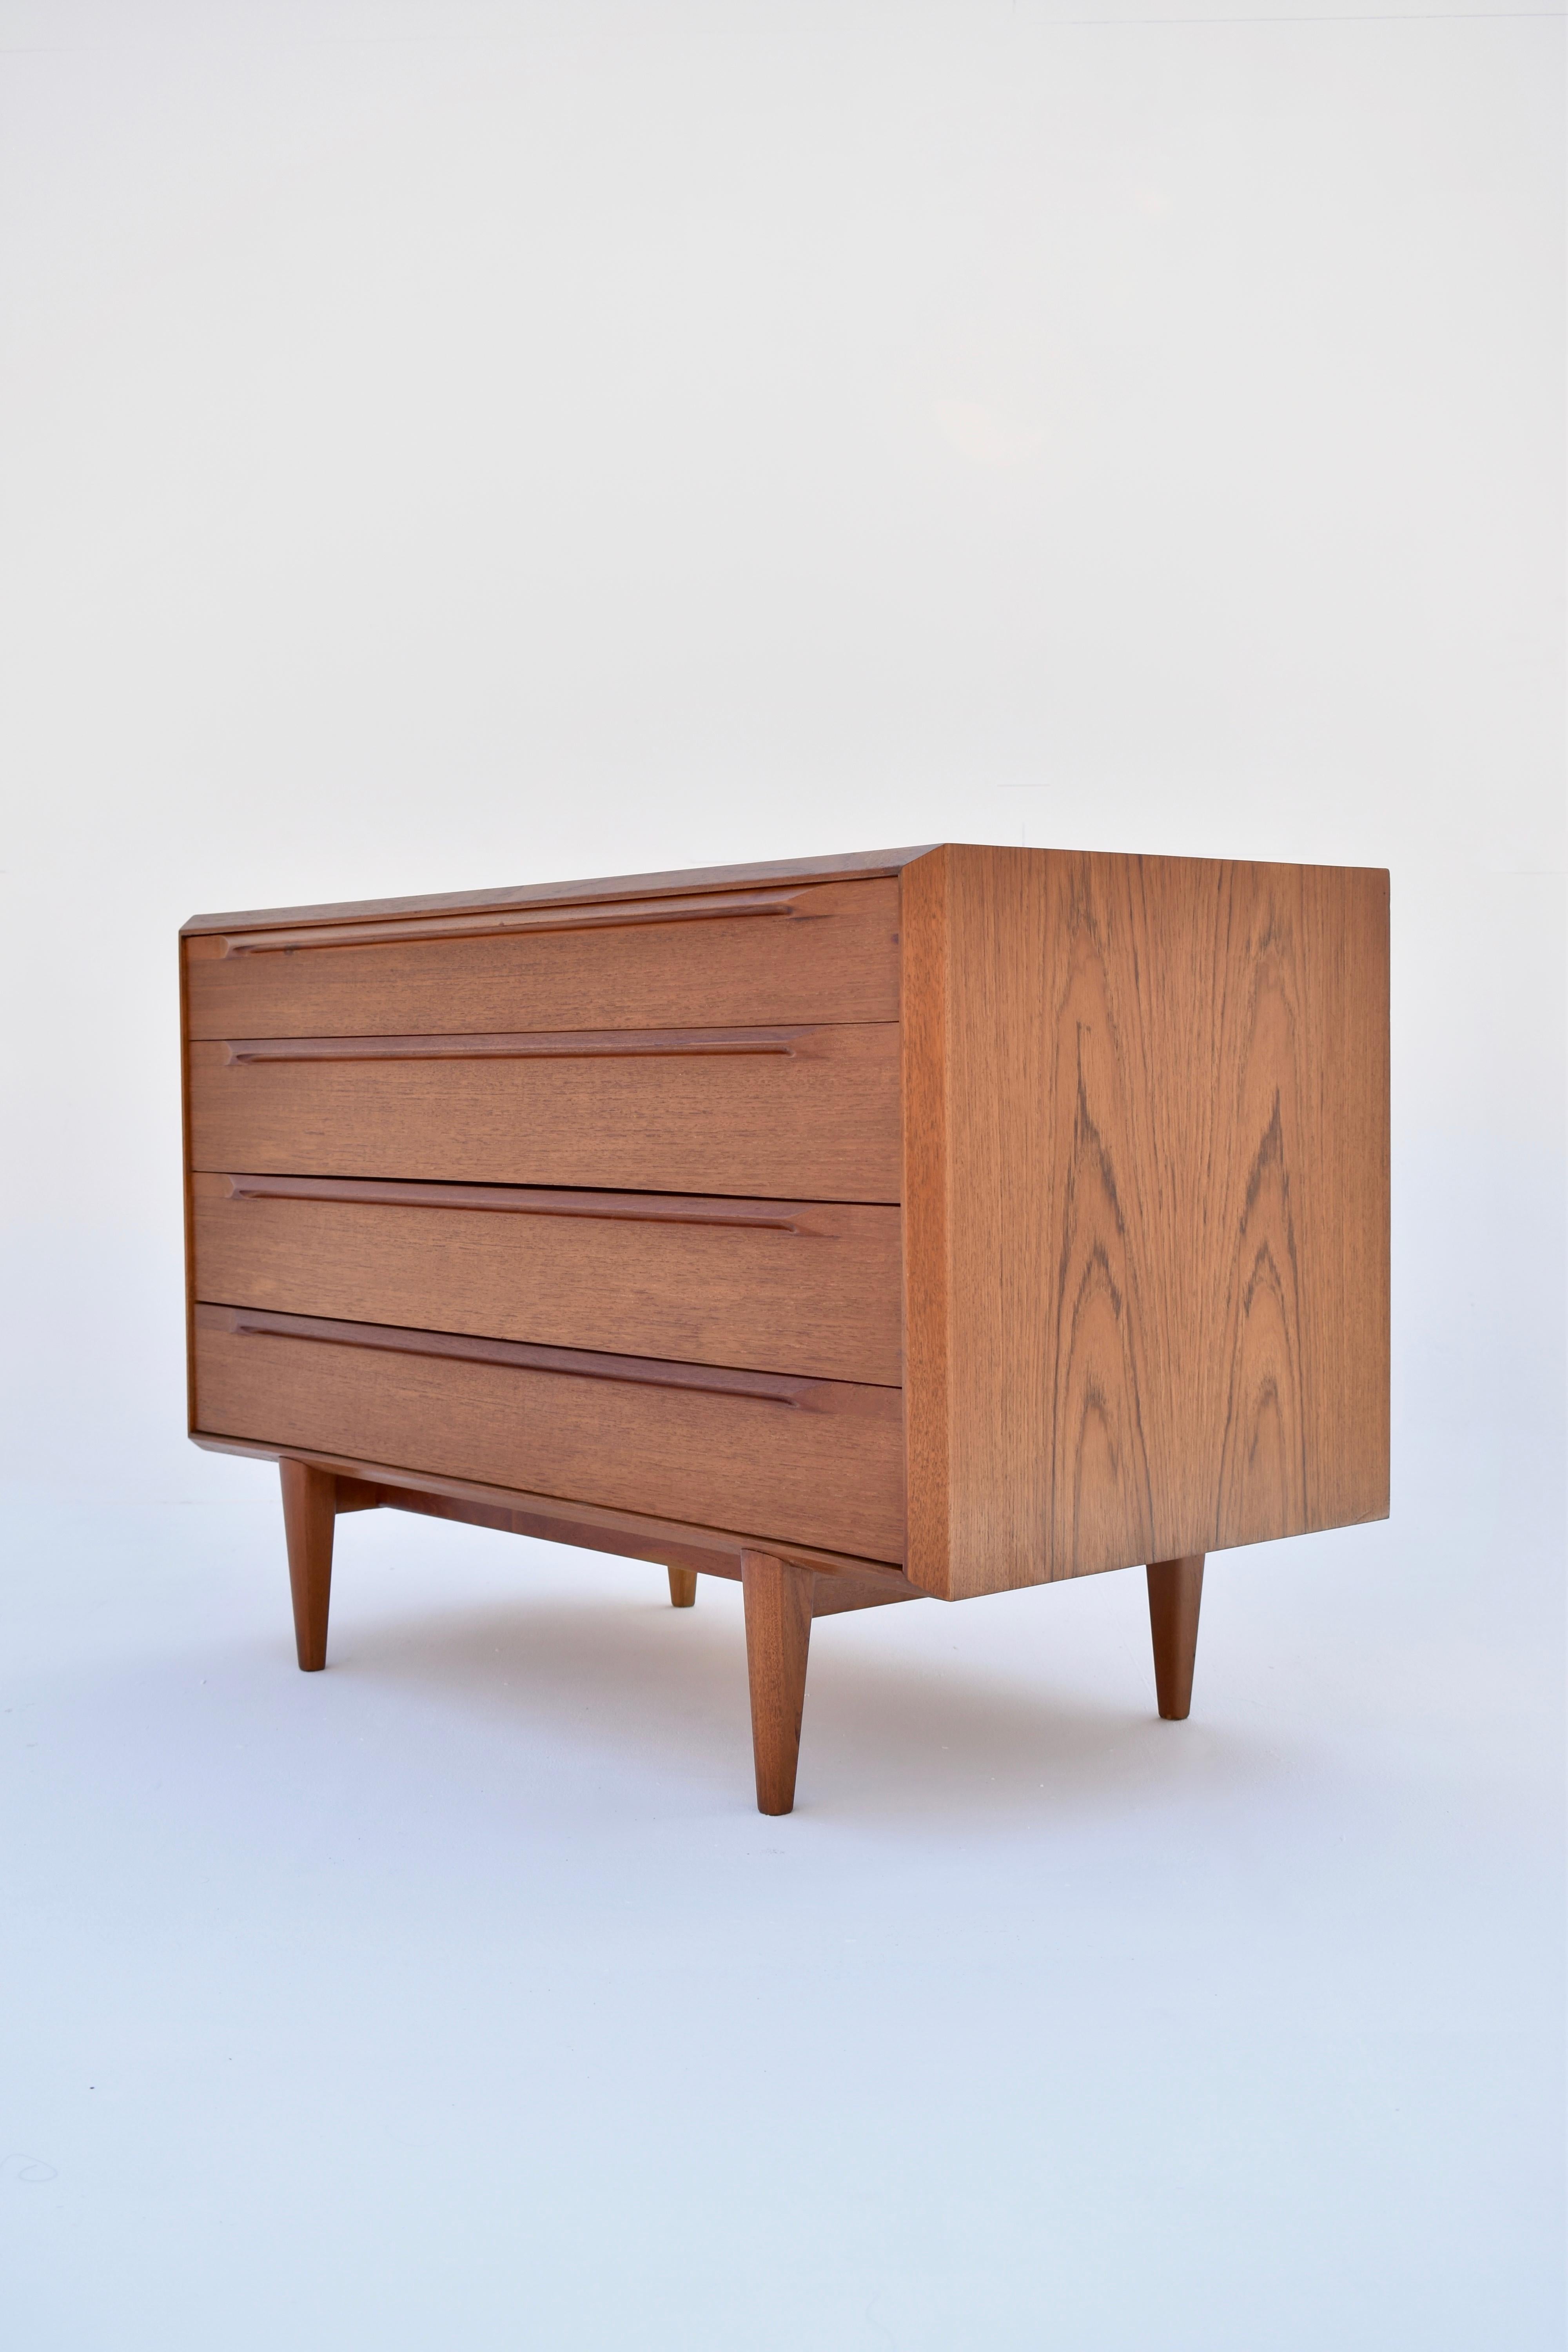 Rare Ib Kofod Larsen Teak Chest Of Drawers For Fredericia Mobelfabrik In Good Condition In Shepperton, Surrey